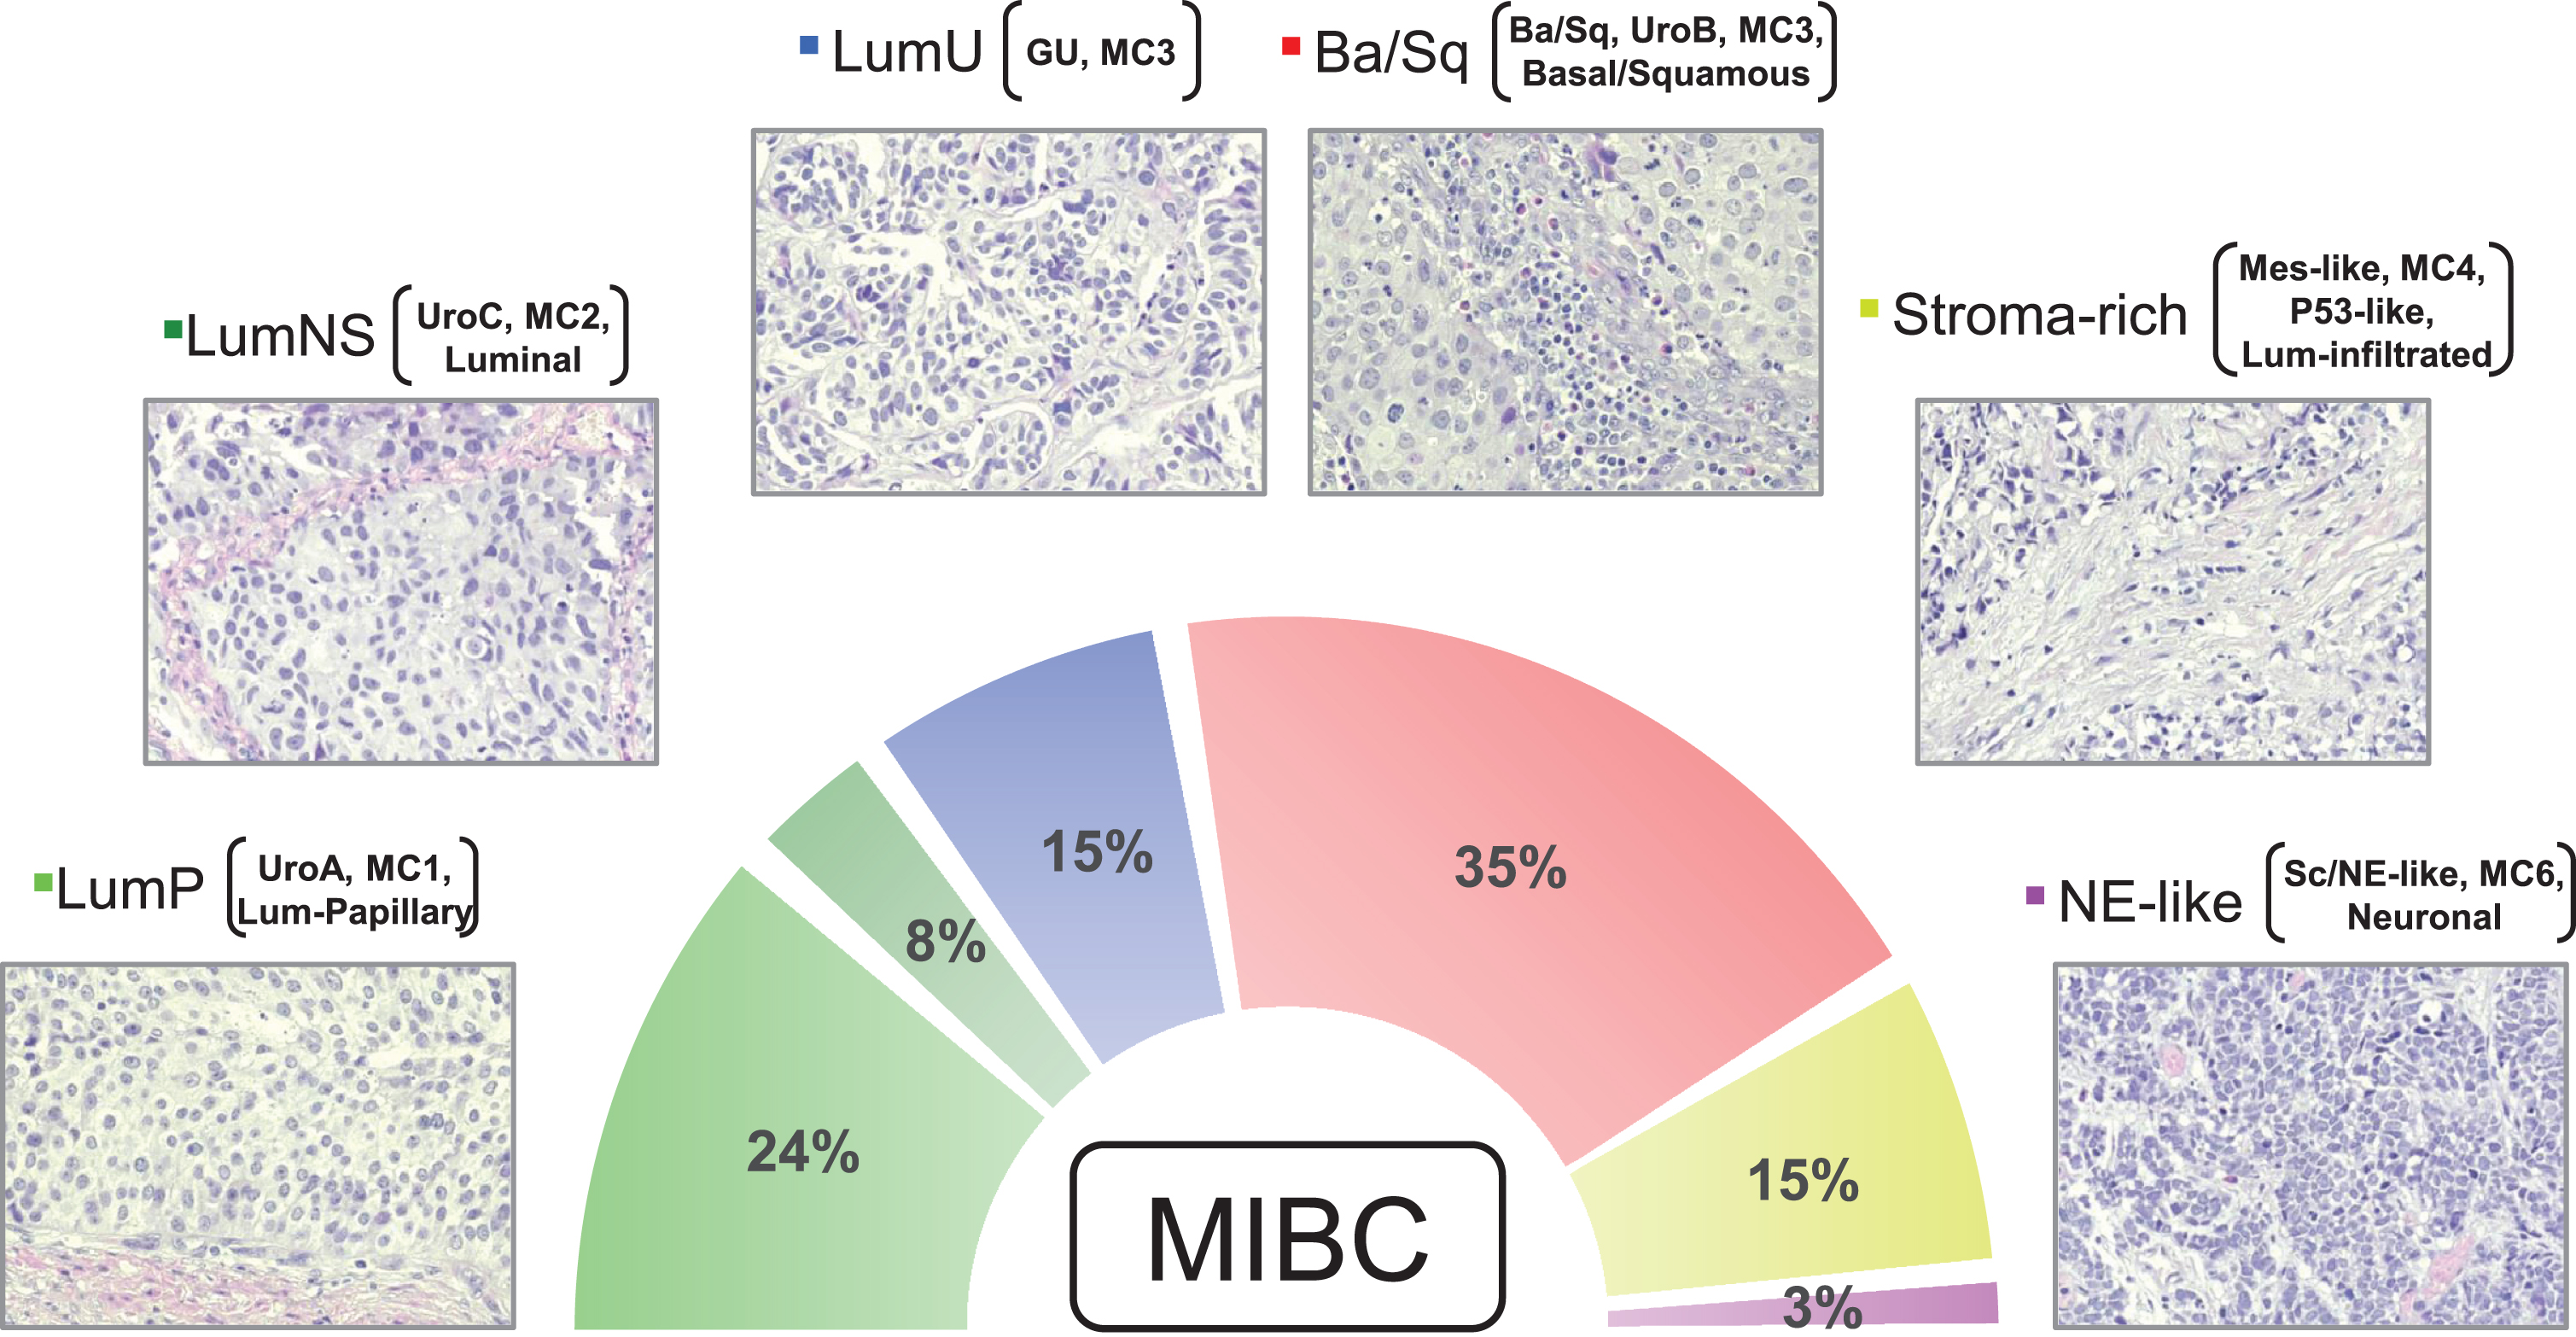 Micrographs of one representative hematoxylin & eosin stained tumor for each consensus subtype is shown (200×). The figure exemplifies the typical histomorphological patterns for each consensus subtype: Luminal-papillary, relatively organized urothelial histology; LumNS, less organized urothelial histology; LumU, severely disorganized urothelial histology; Ba/Sq, squamous differentiation; Stroma rich, Infiltrative growth pattern with stromal reaction; NE-like, Neuroendocrine differentiation. While the neuroendocrine tumors have neuroendocrine molecular features, they may not have neuroendocrine histology. Percentages show the proportion of MIBC tumors belonging to each subtype based on data in Kamoun et al. (2019). In addition to the consensus subtype nomenclature, subtypes from other classification systems (Lund, CIT-Curie, MDA, and TCGA) enriched in each of the consensus subtypes are shown in brackets.